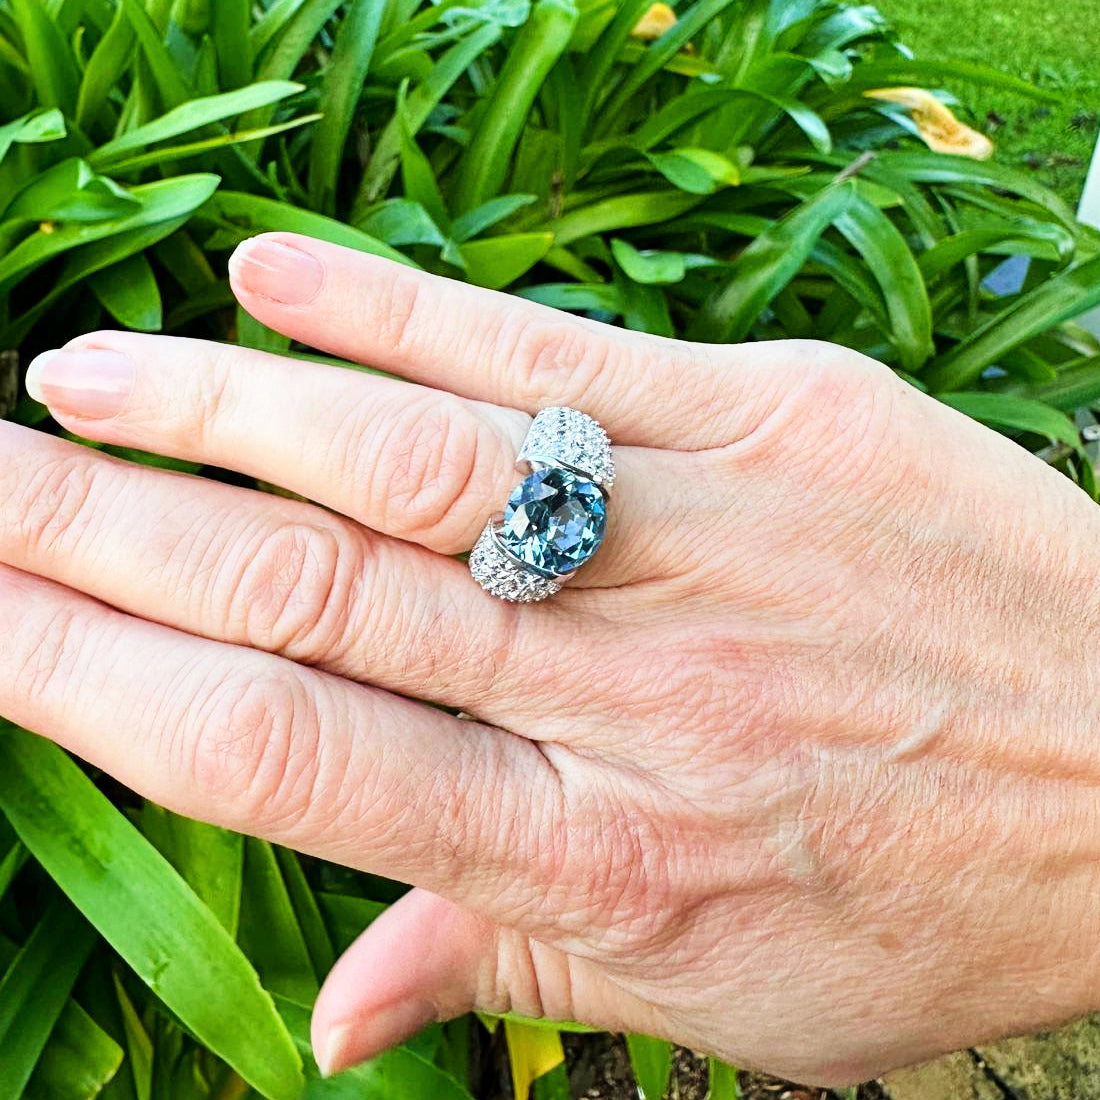 Deep Ocean Ring in 925 sterling silver features a generous 3-carat blue facet cut cubic zirconia stone surrounded by clear cubic zirconia stones. Worldwide shipping. Affordable luxury jewellery by Bellagio & Co.